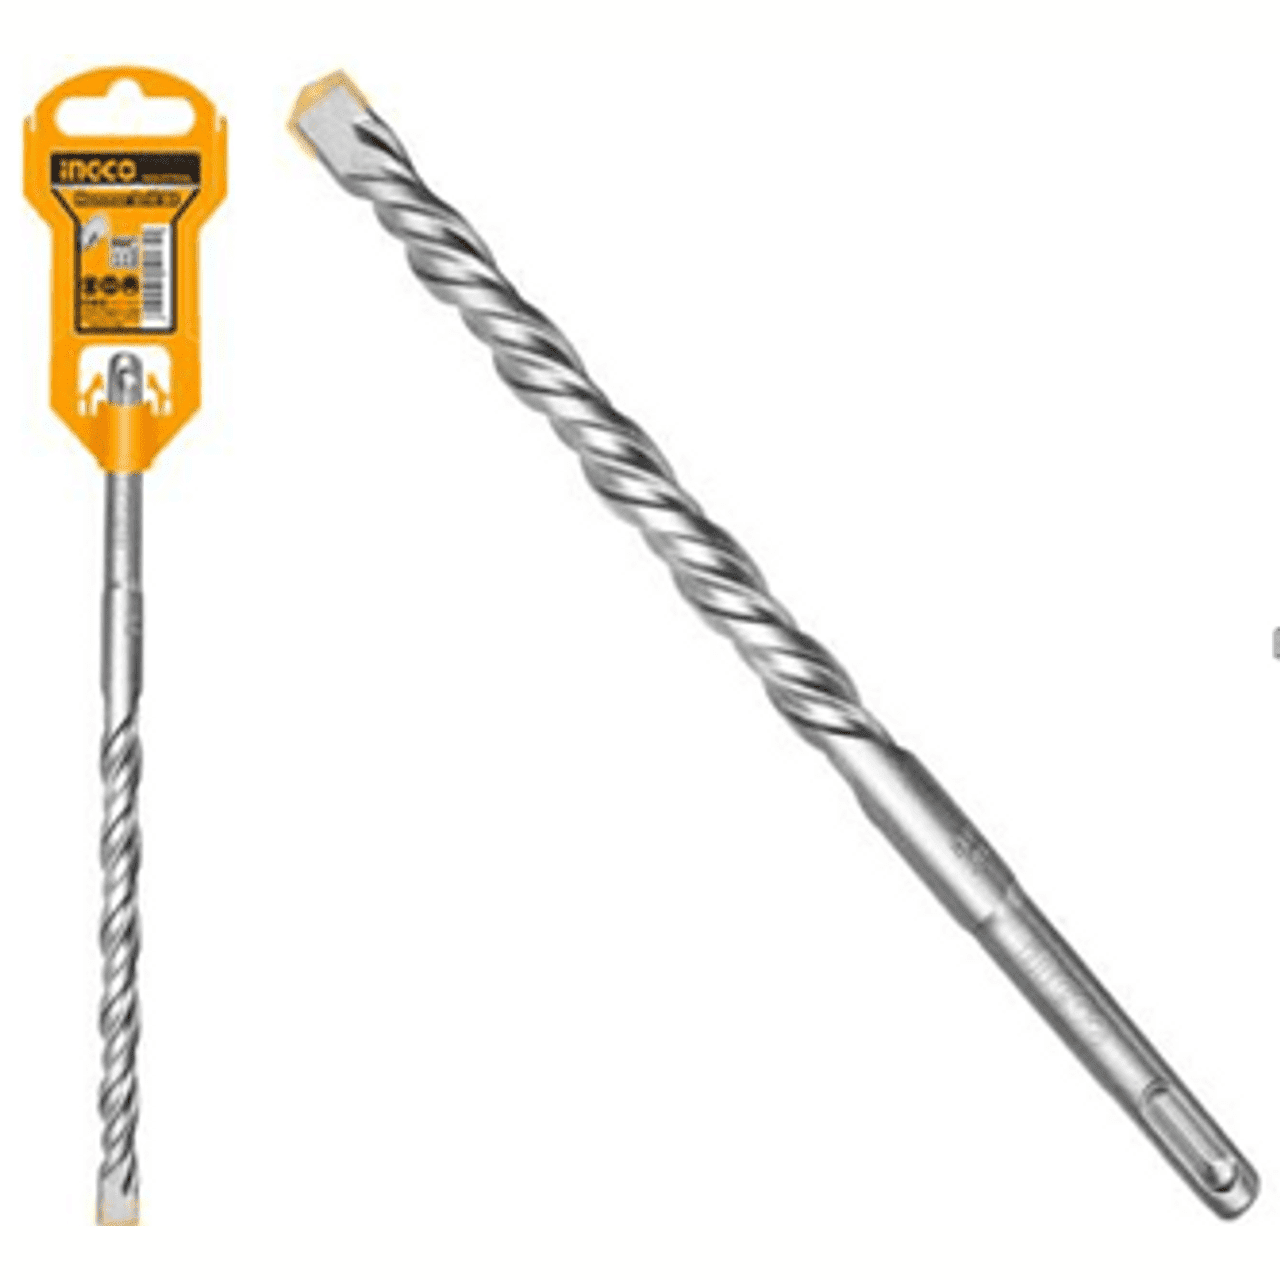 Ingco SDS Plus Hammer Drill Bit | Buy Online in Accra, Ghana - Supply Master Drill Bits Buy Tools hardware Building materials